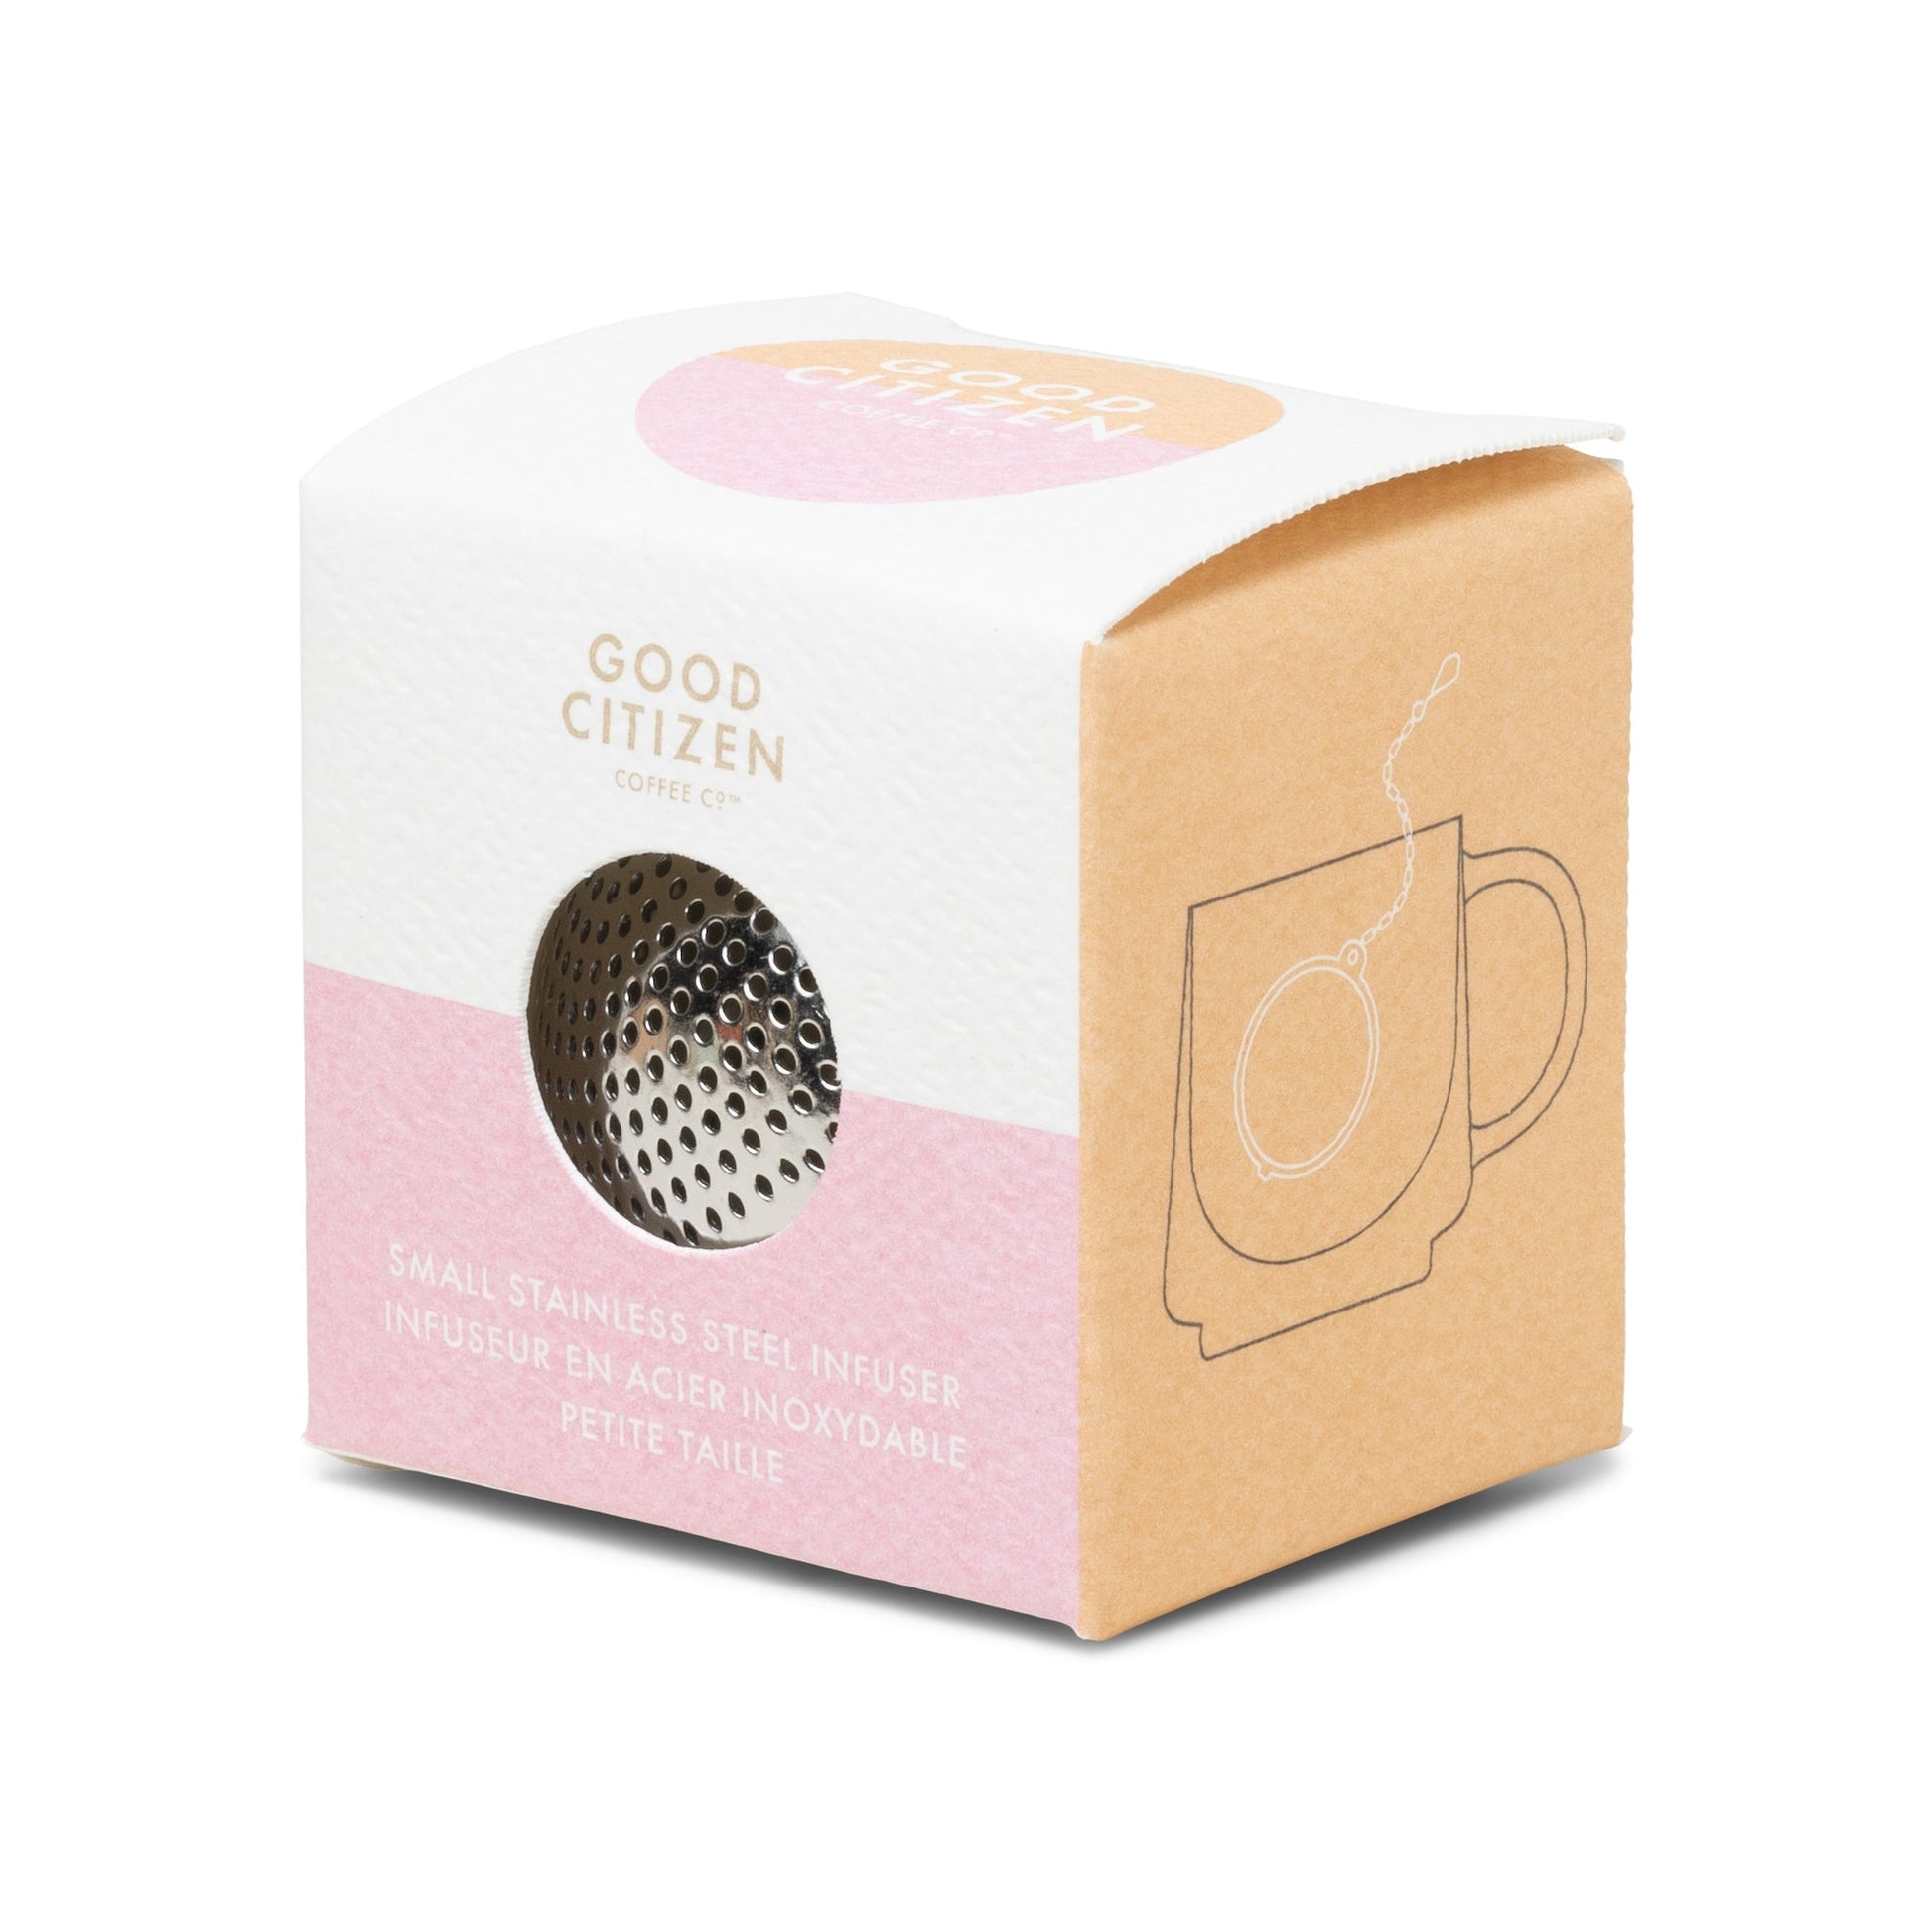 Small Stainless Steel Tea Infuser side of box